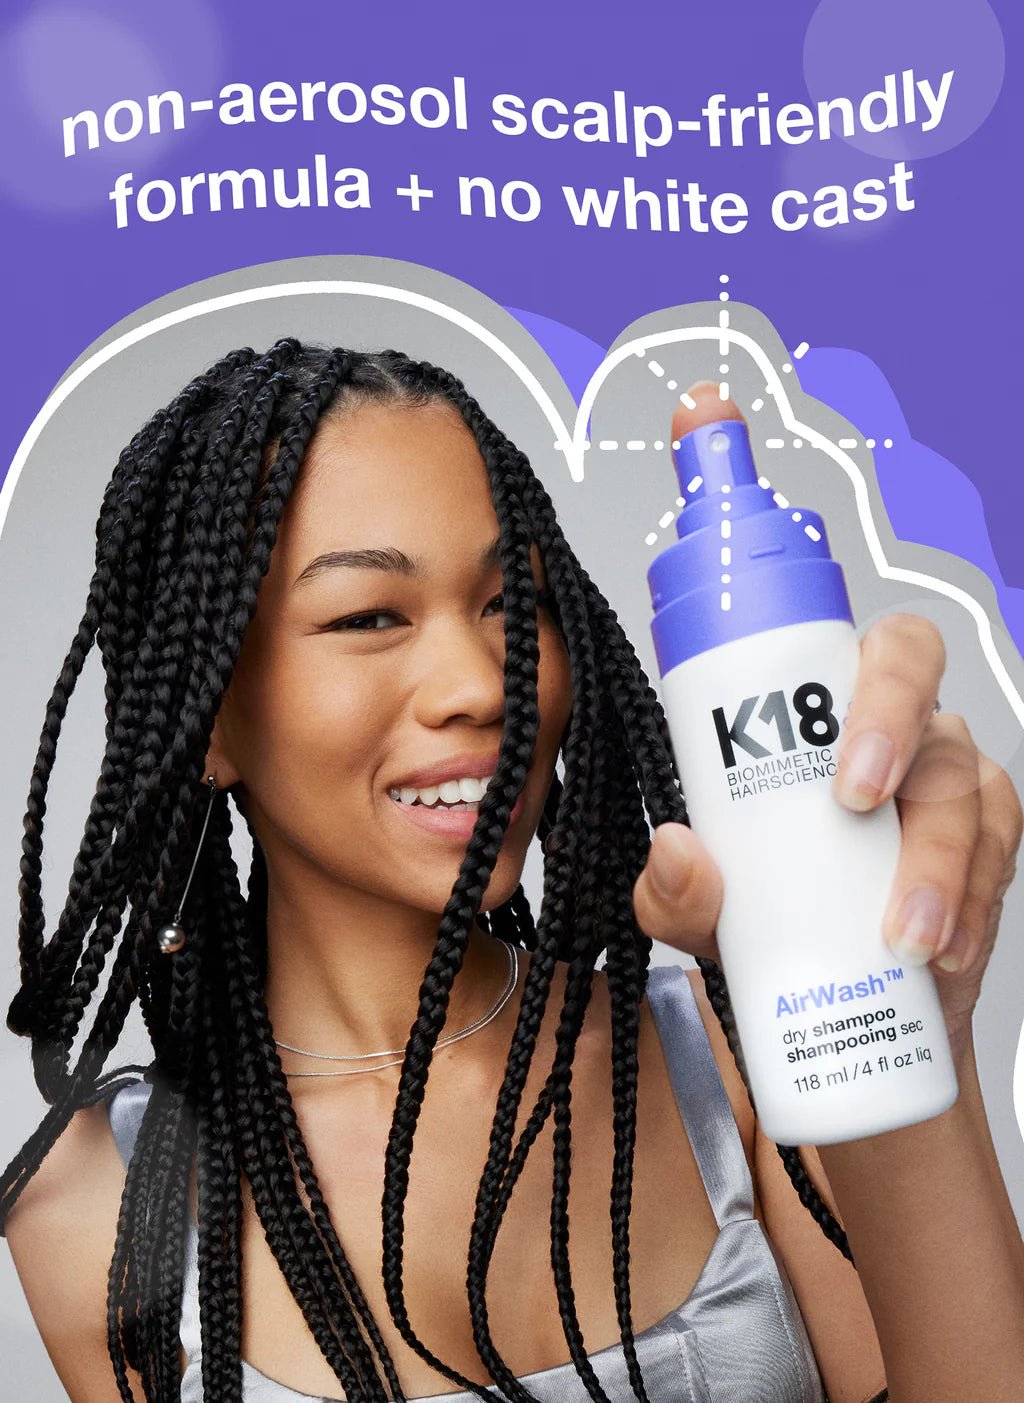 A person with braided hair holds a bottle of K18 AirWash Dry Shampoo from Simply Colour Hair Salon Studio & Online Store. Text above reads, "non-aerosol scalp-friendly formula + no white cast, reduces oil with odorBIND biotechnology".